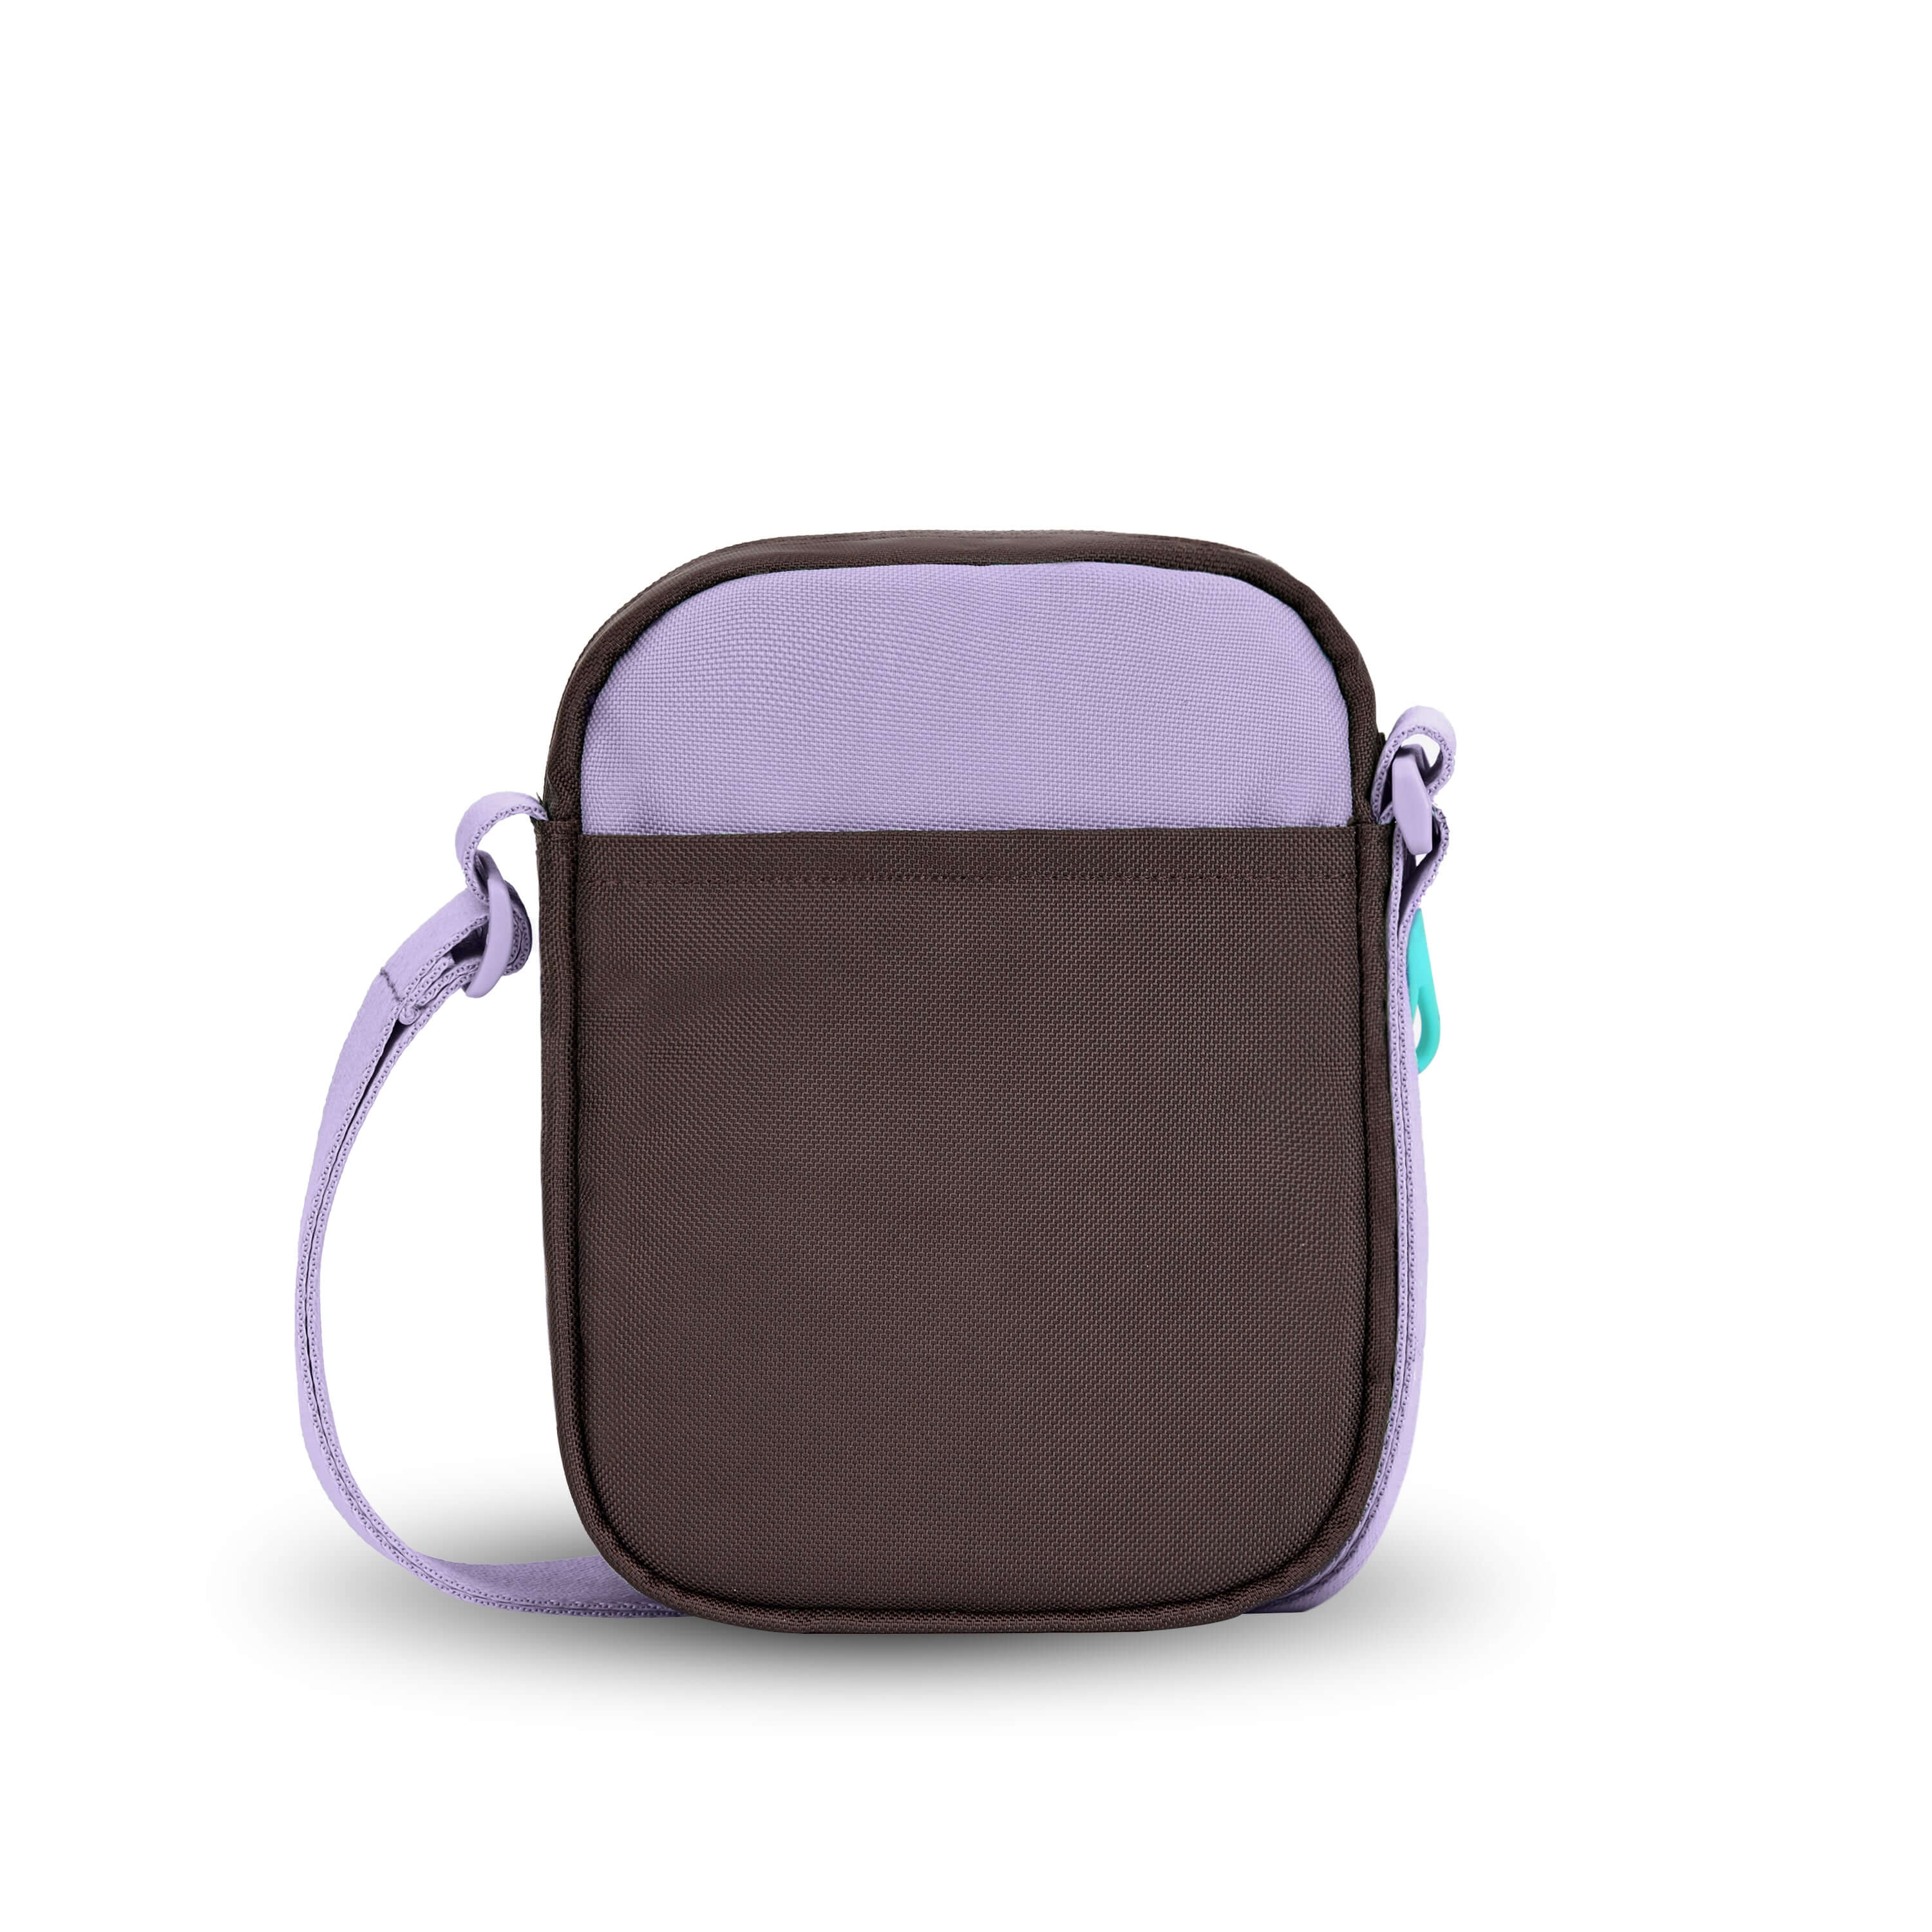 Back view of Sherpani crossbody, the Rogue in Lavender. The back features an external pouch.